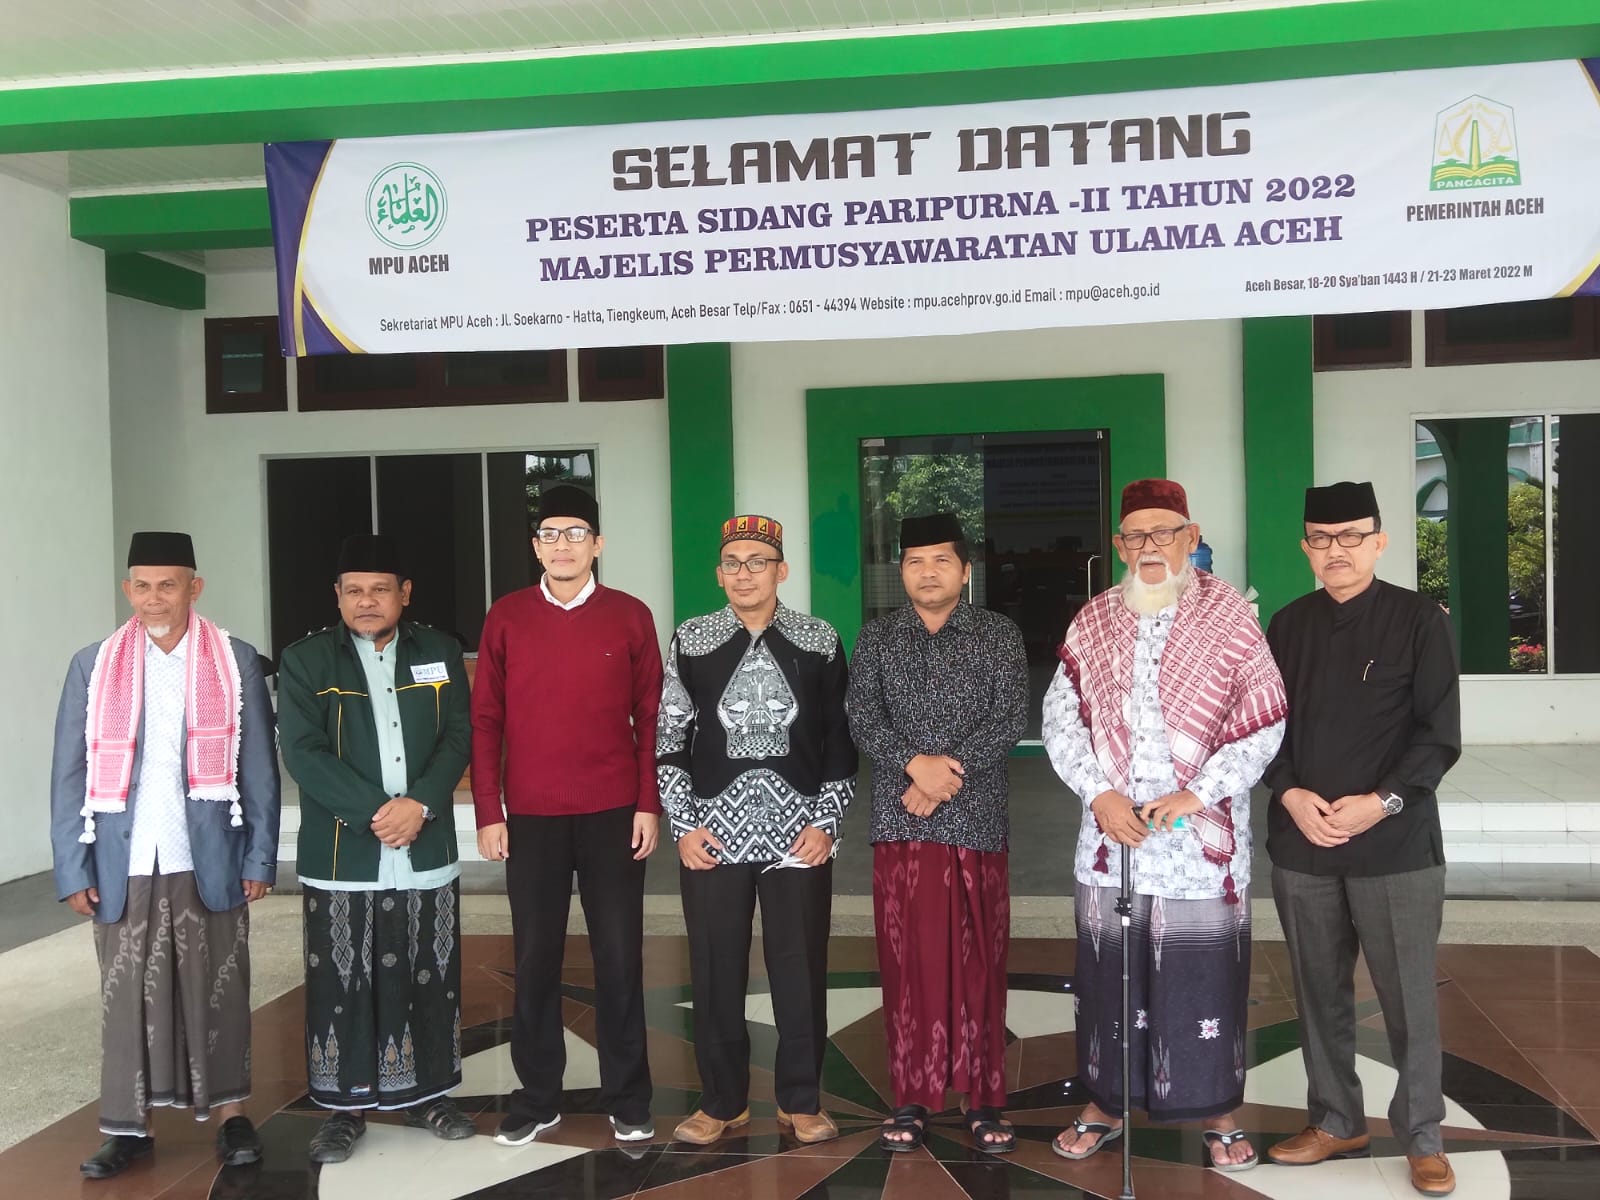 With the Acehnese Ulama